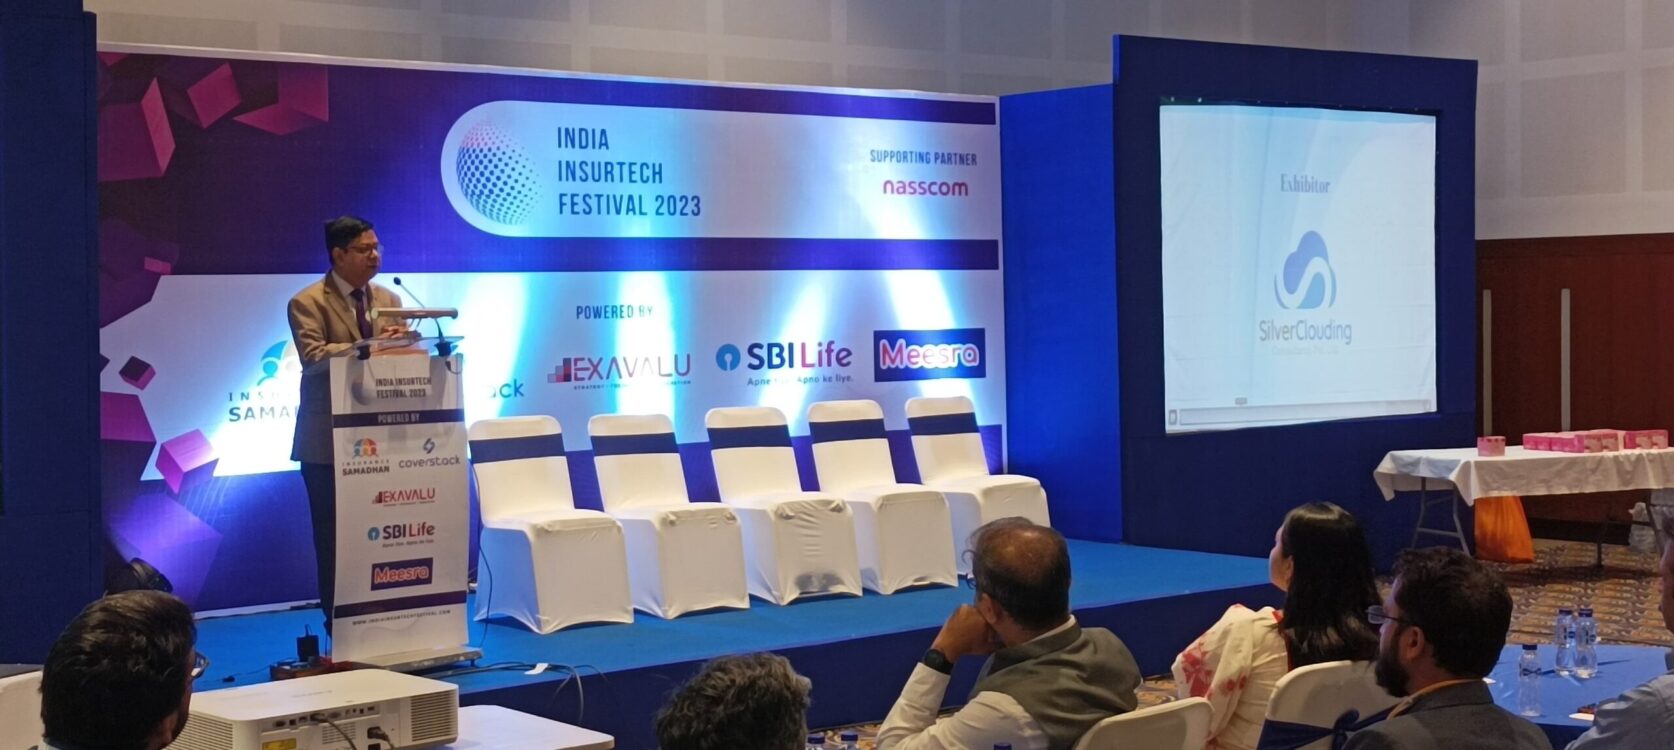 SilverClouding’s Take on the Indian Insuretech Festival